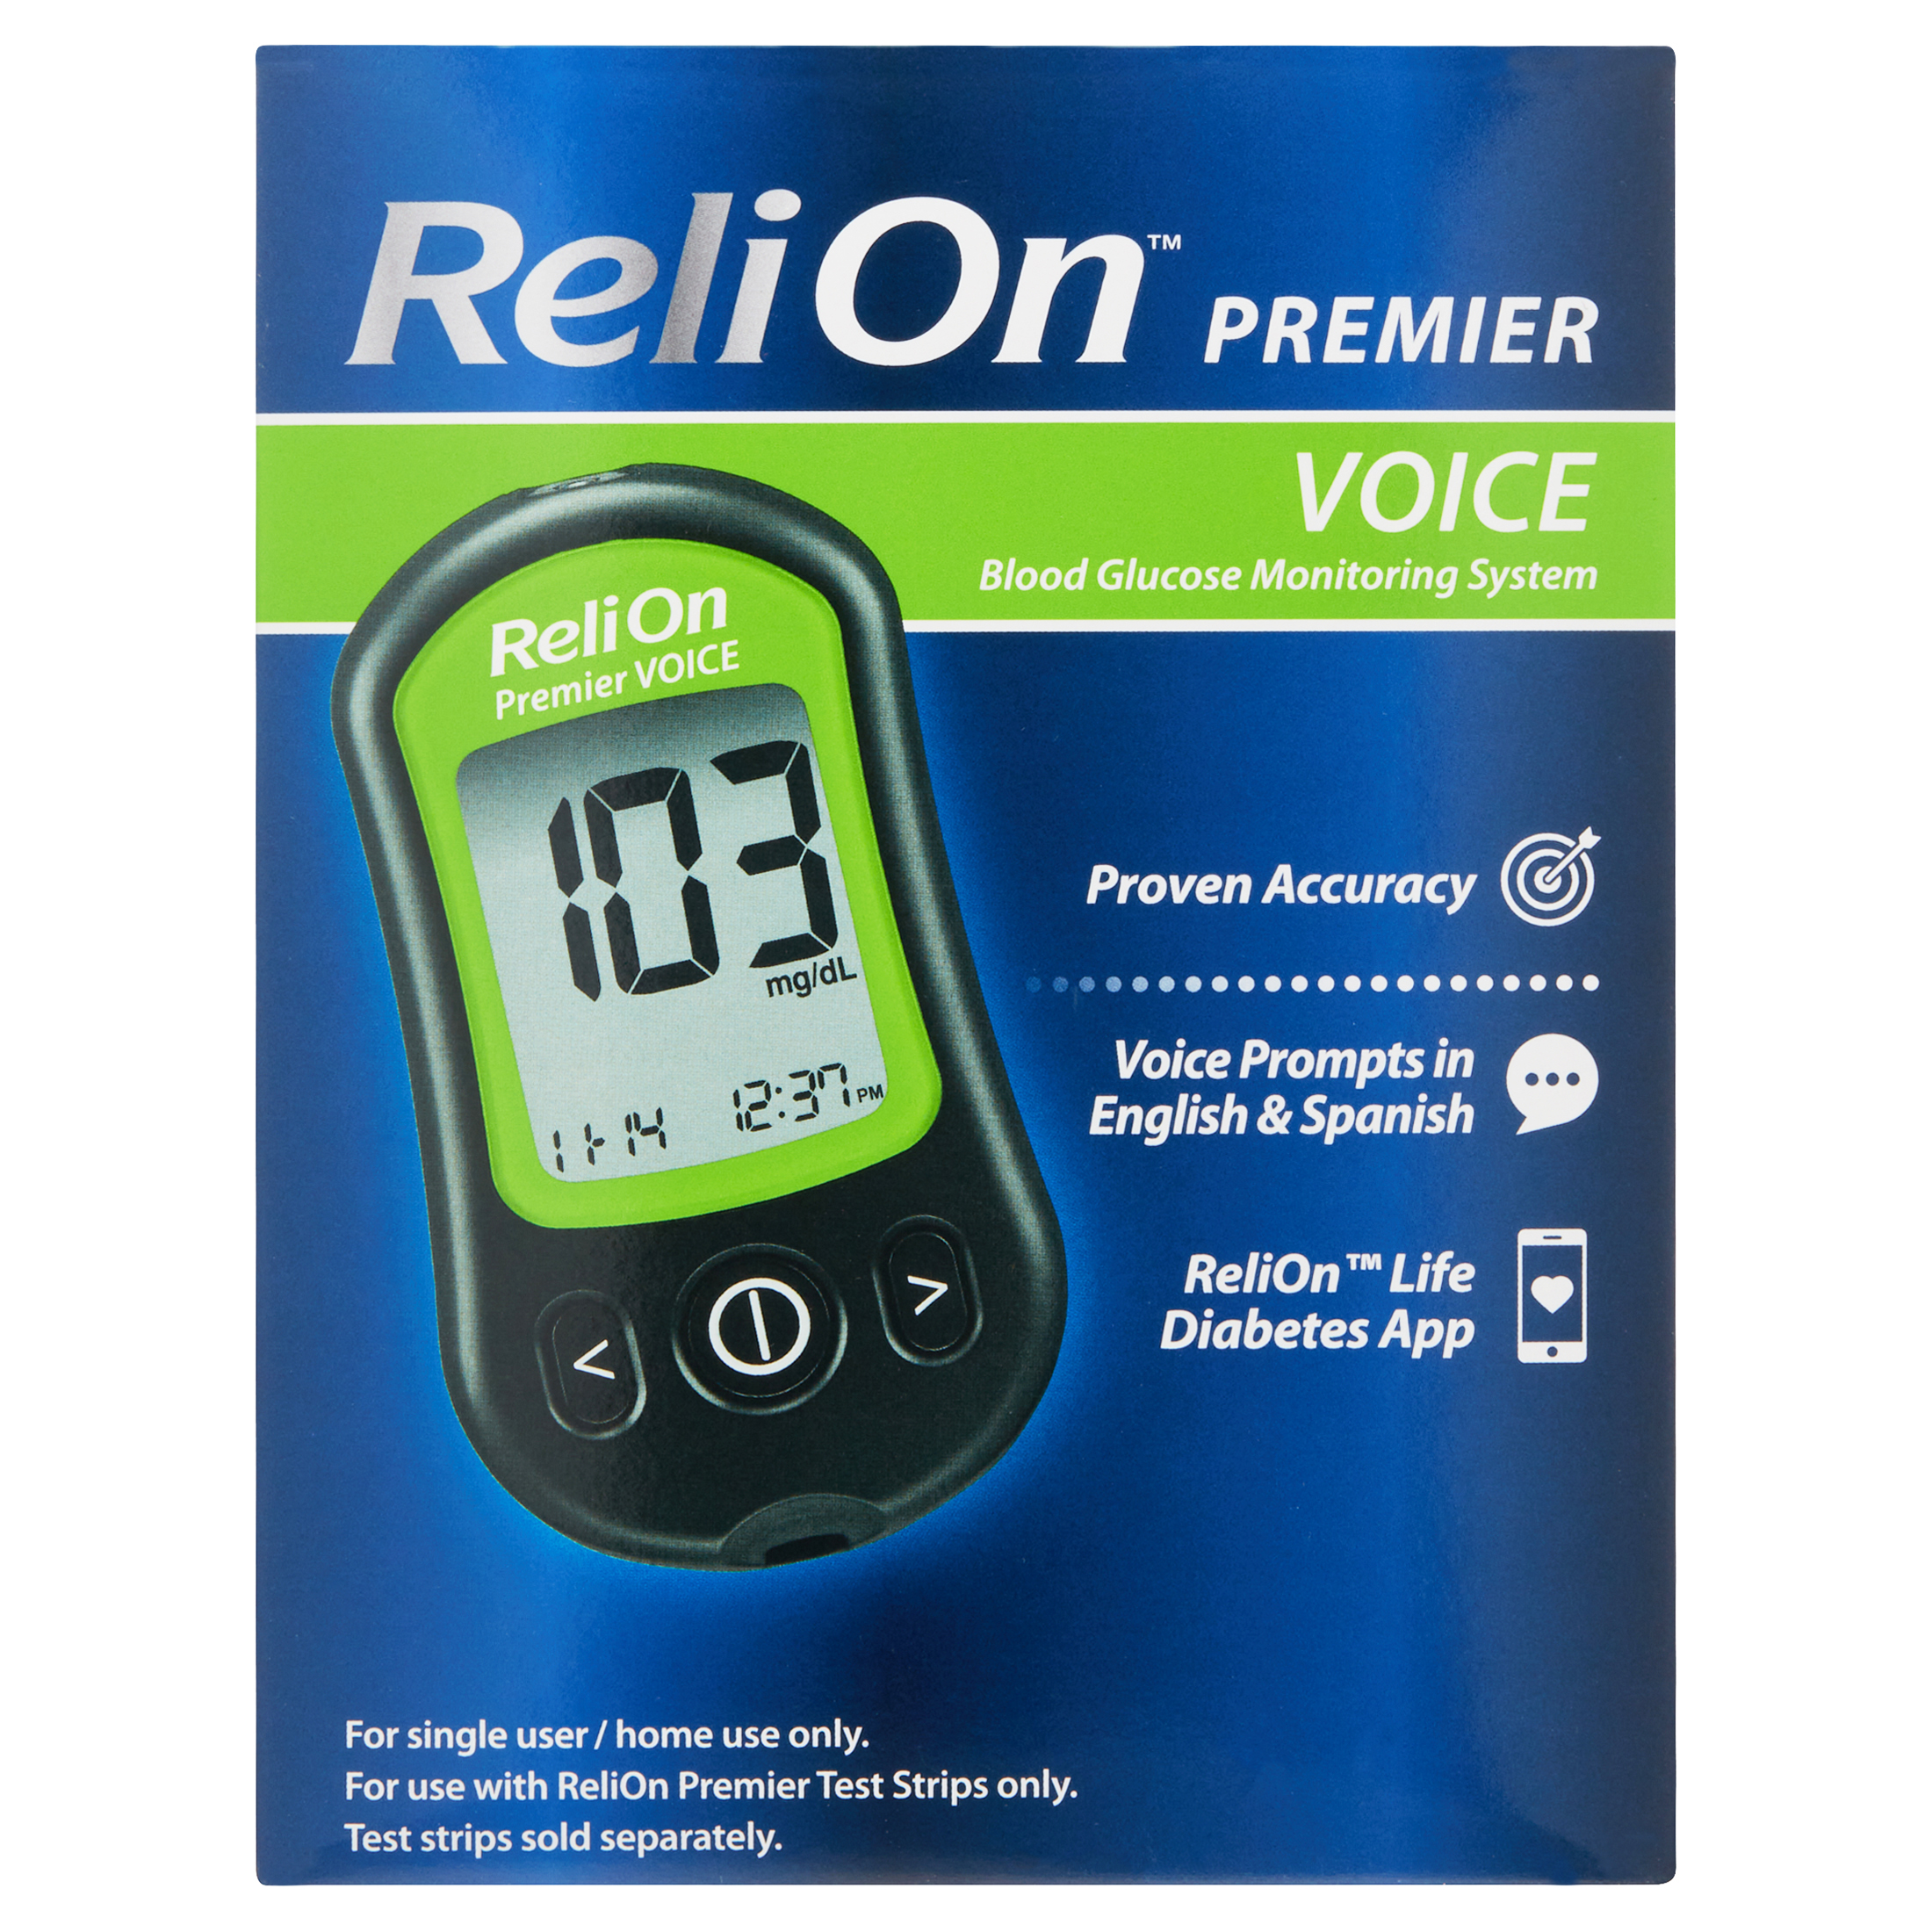 ReliOn Premier VOICE Blood Glucose Monitoring System - image 1 of 8